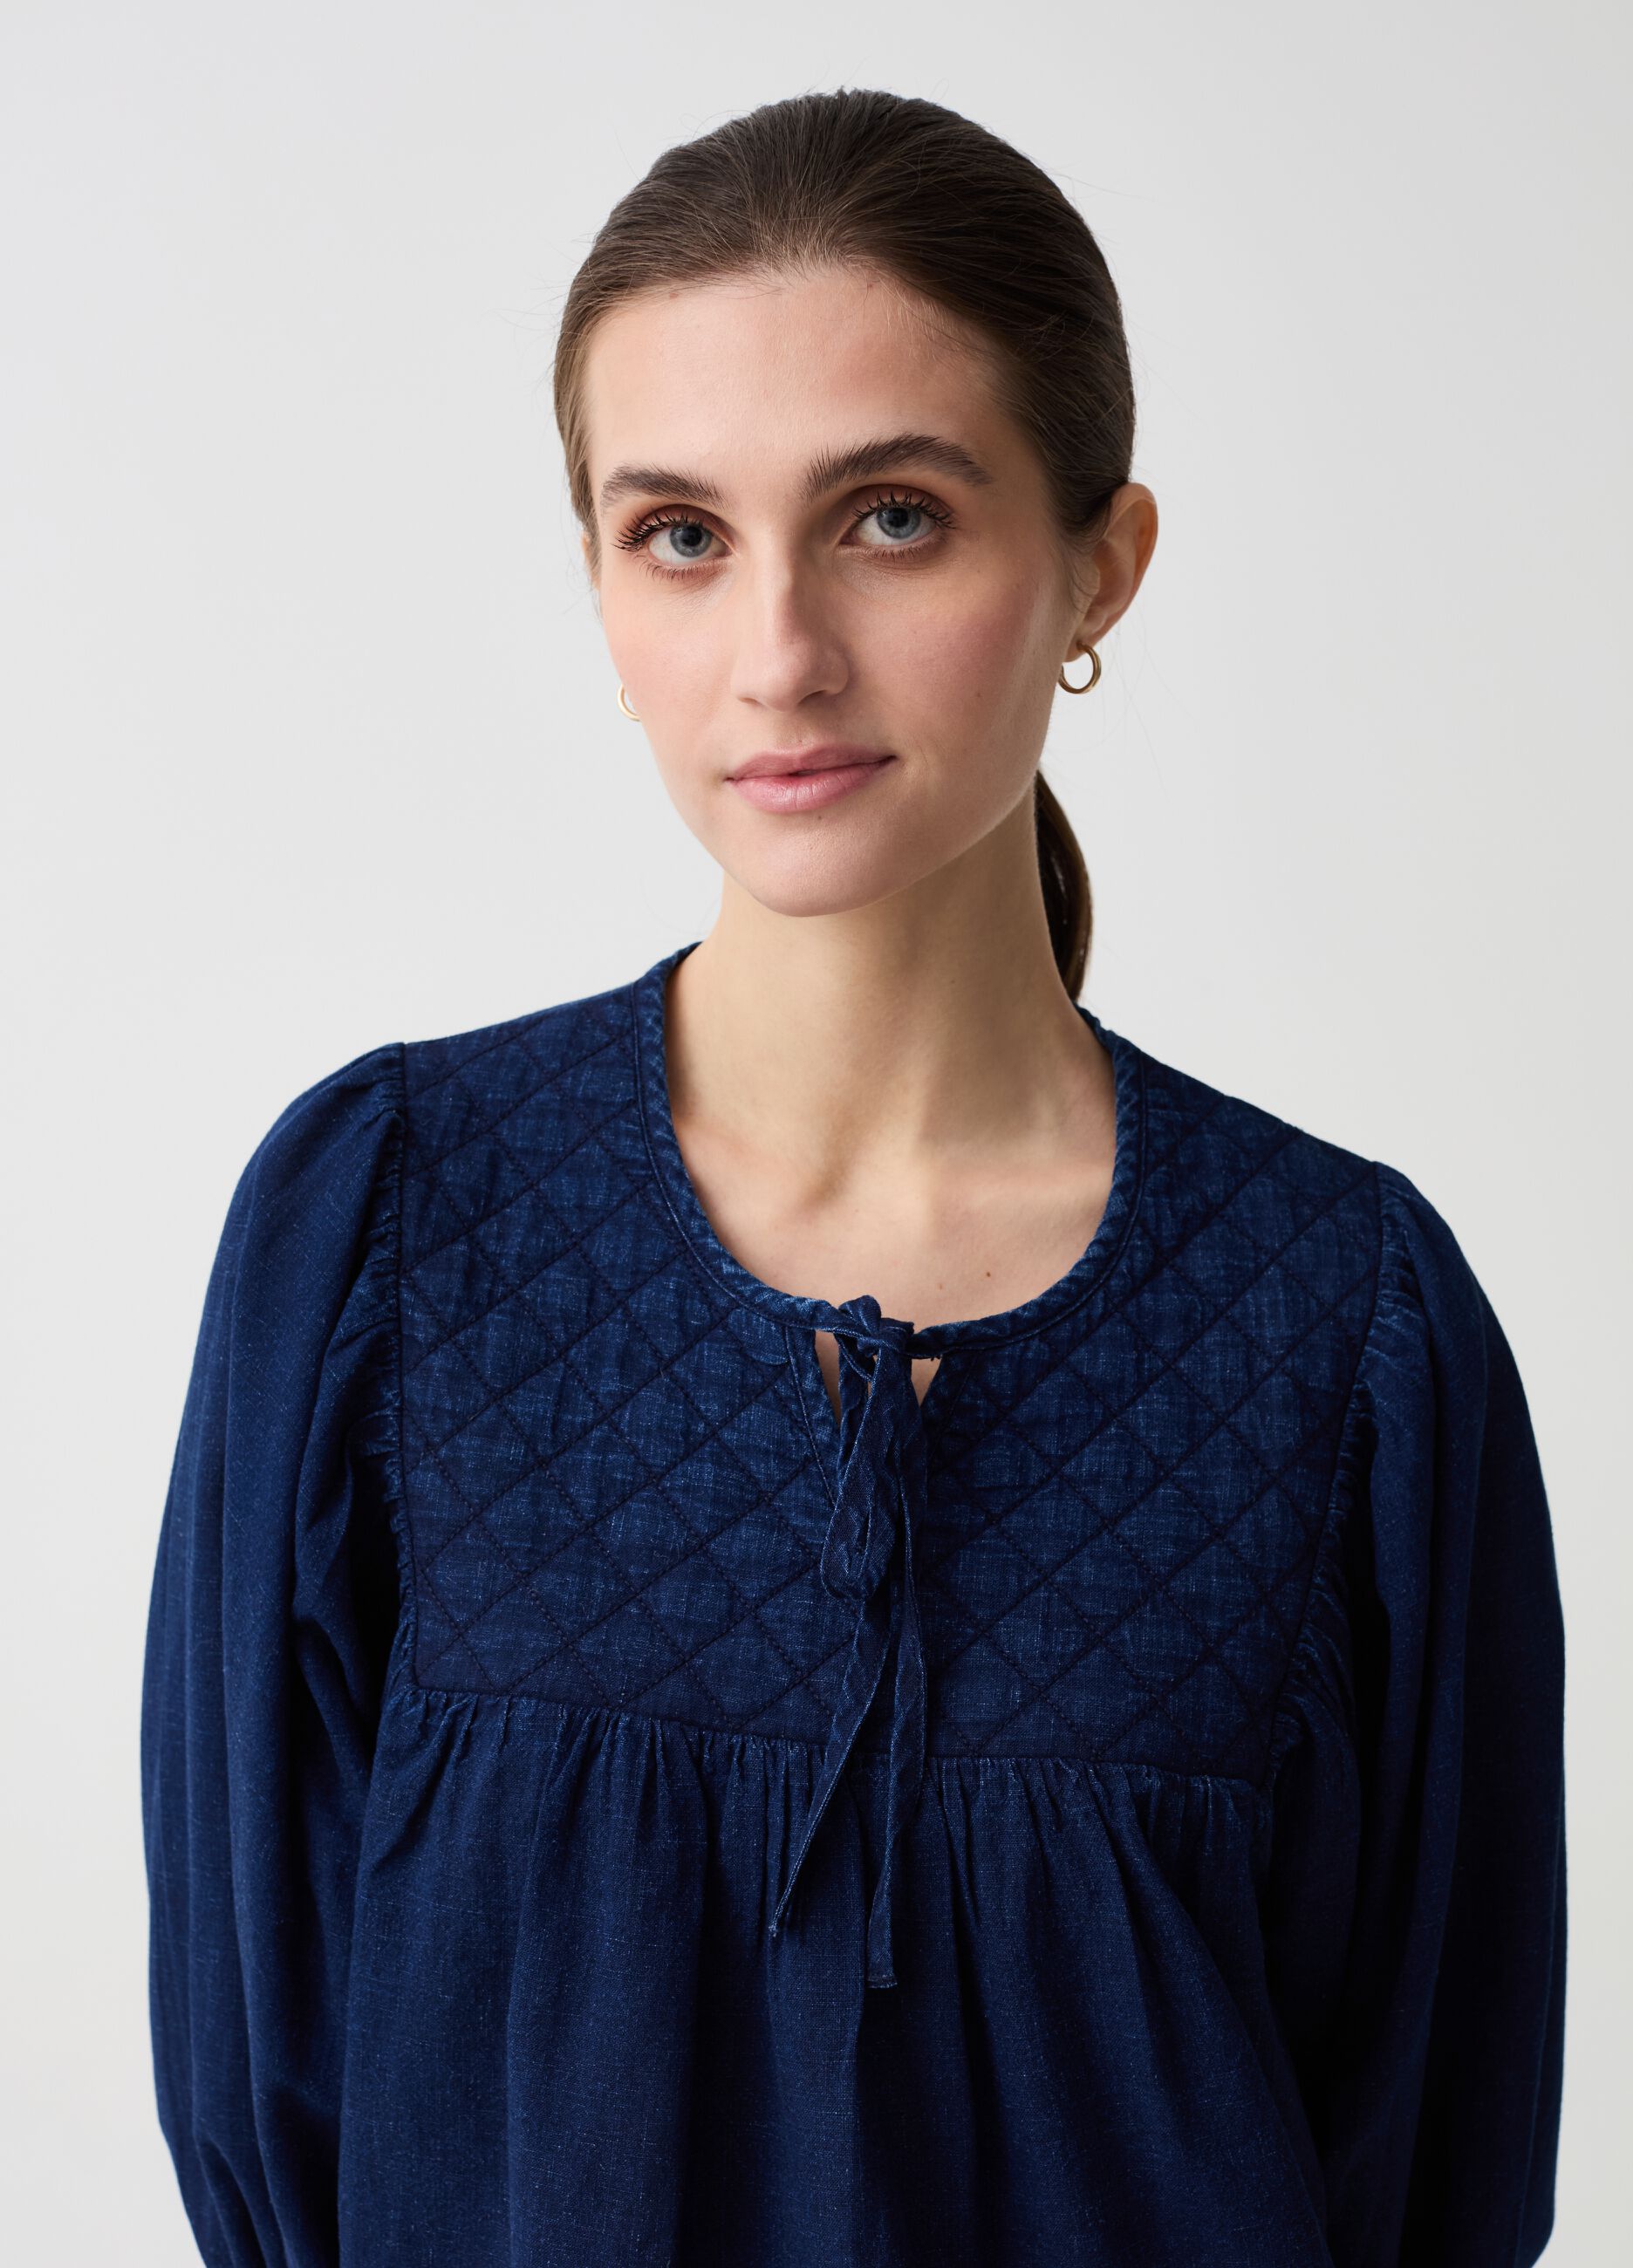 Denim blouse with diamond embroidery